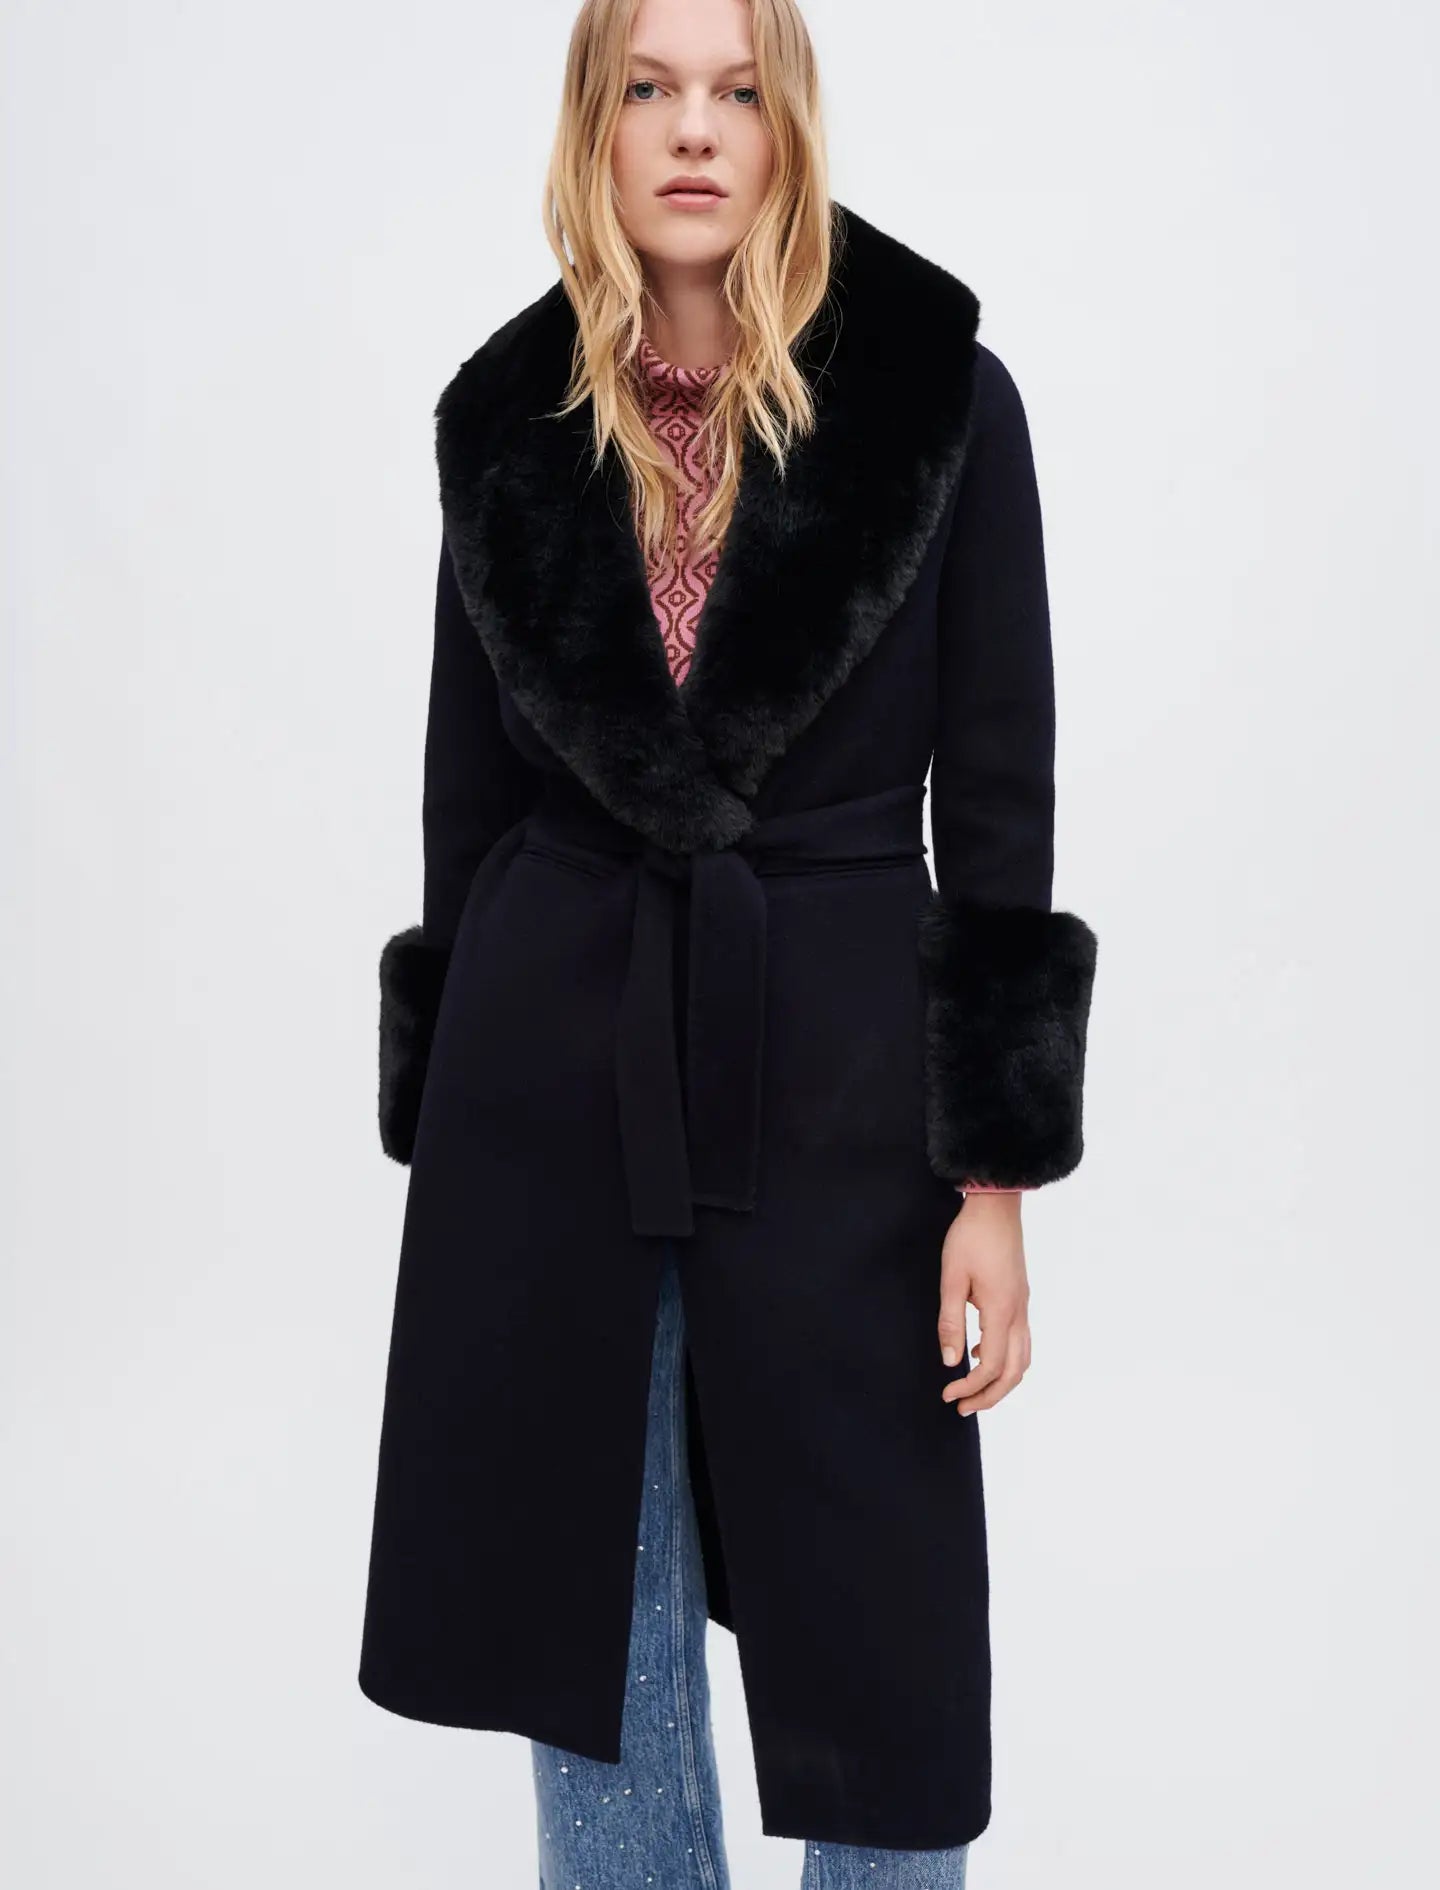 Navy featured DOUBLE-FACED FAUX FUR COAT